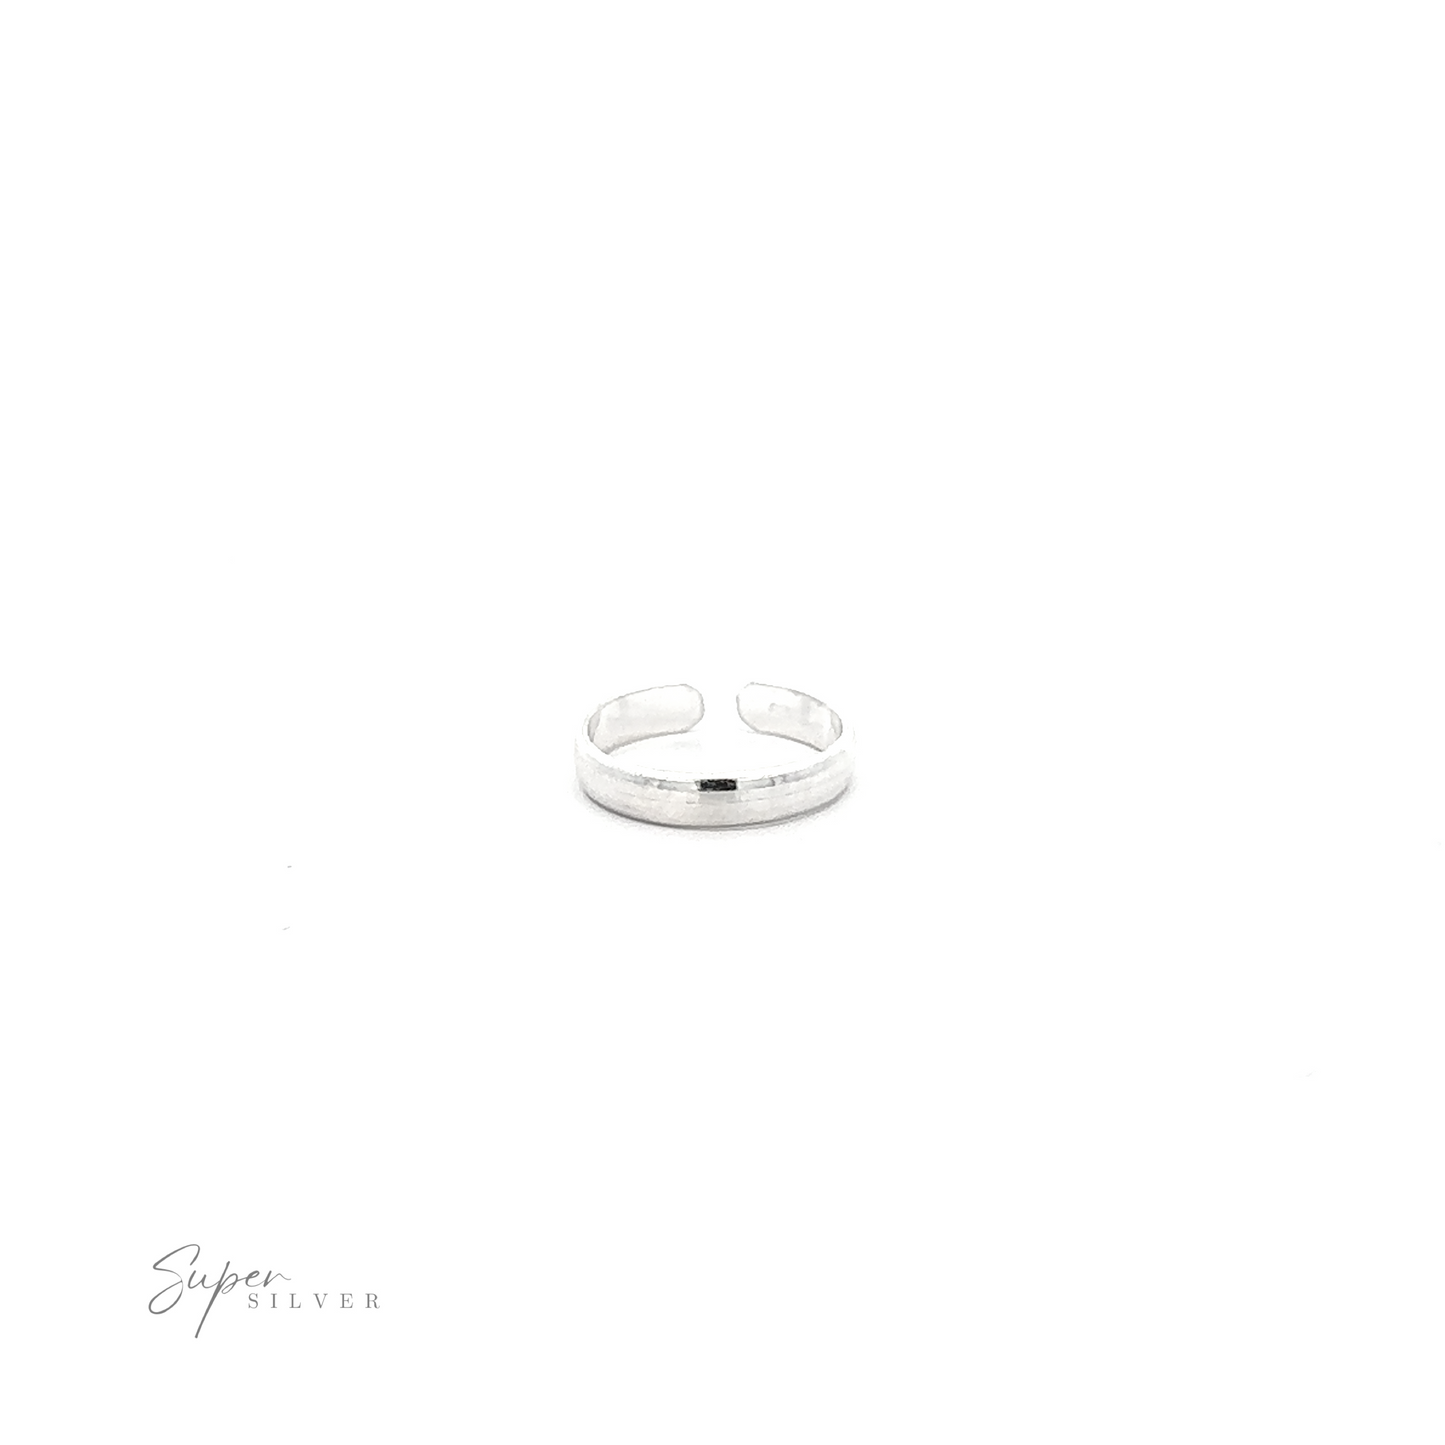 
                  
                    A Rounded Plain Band Adjustable Toe Ring displayed on a white background with the text "super silver" in elegant script below it.
                  
                